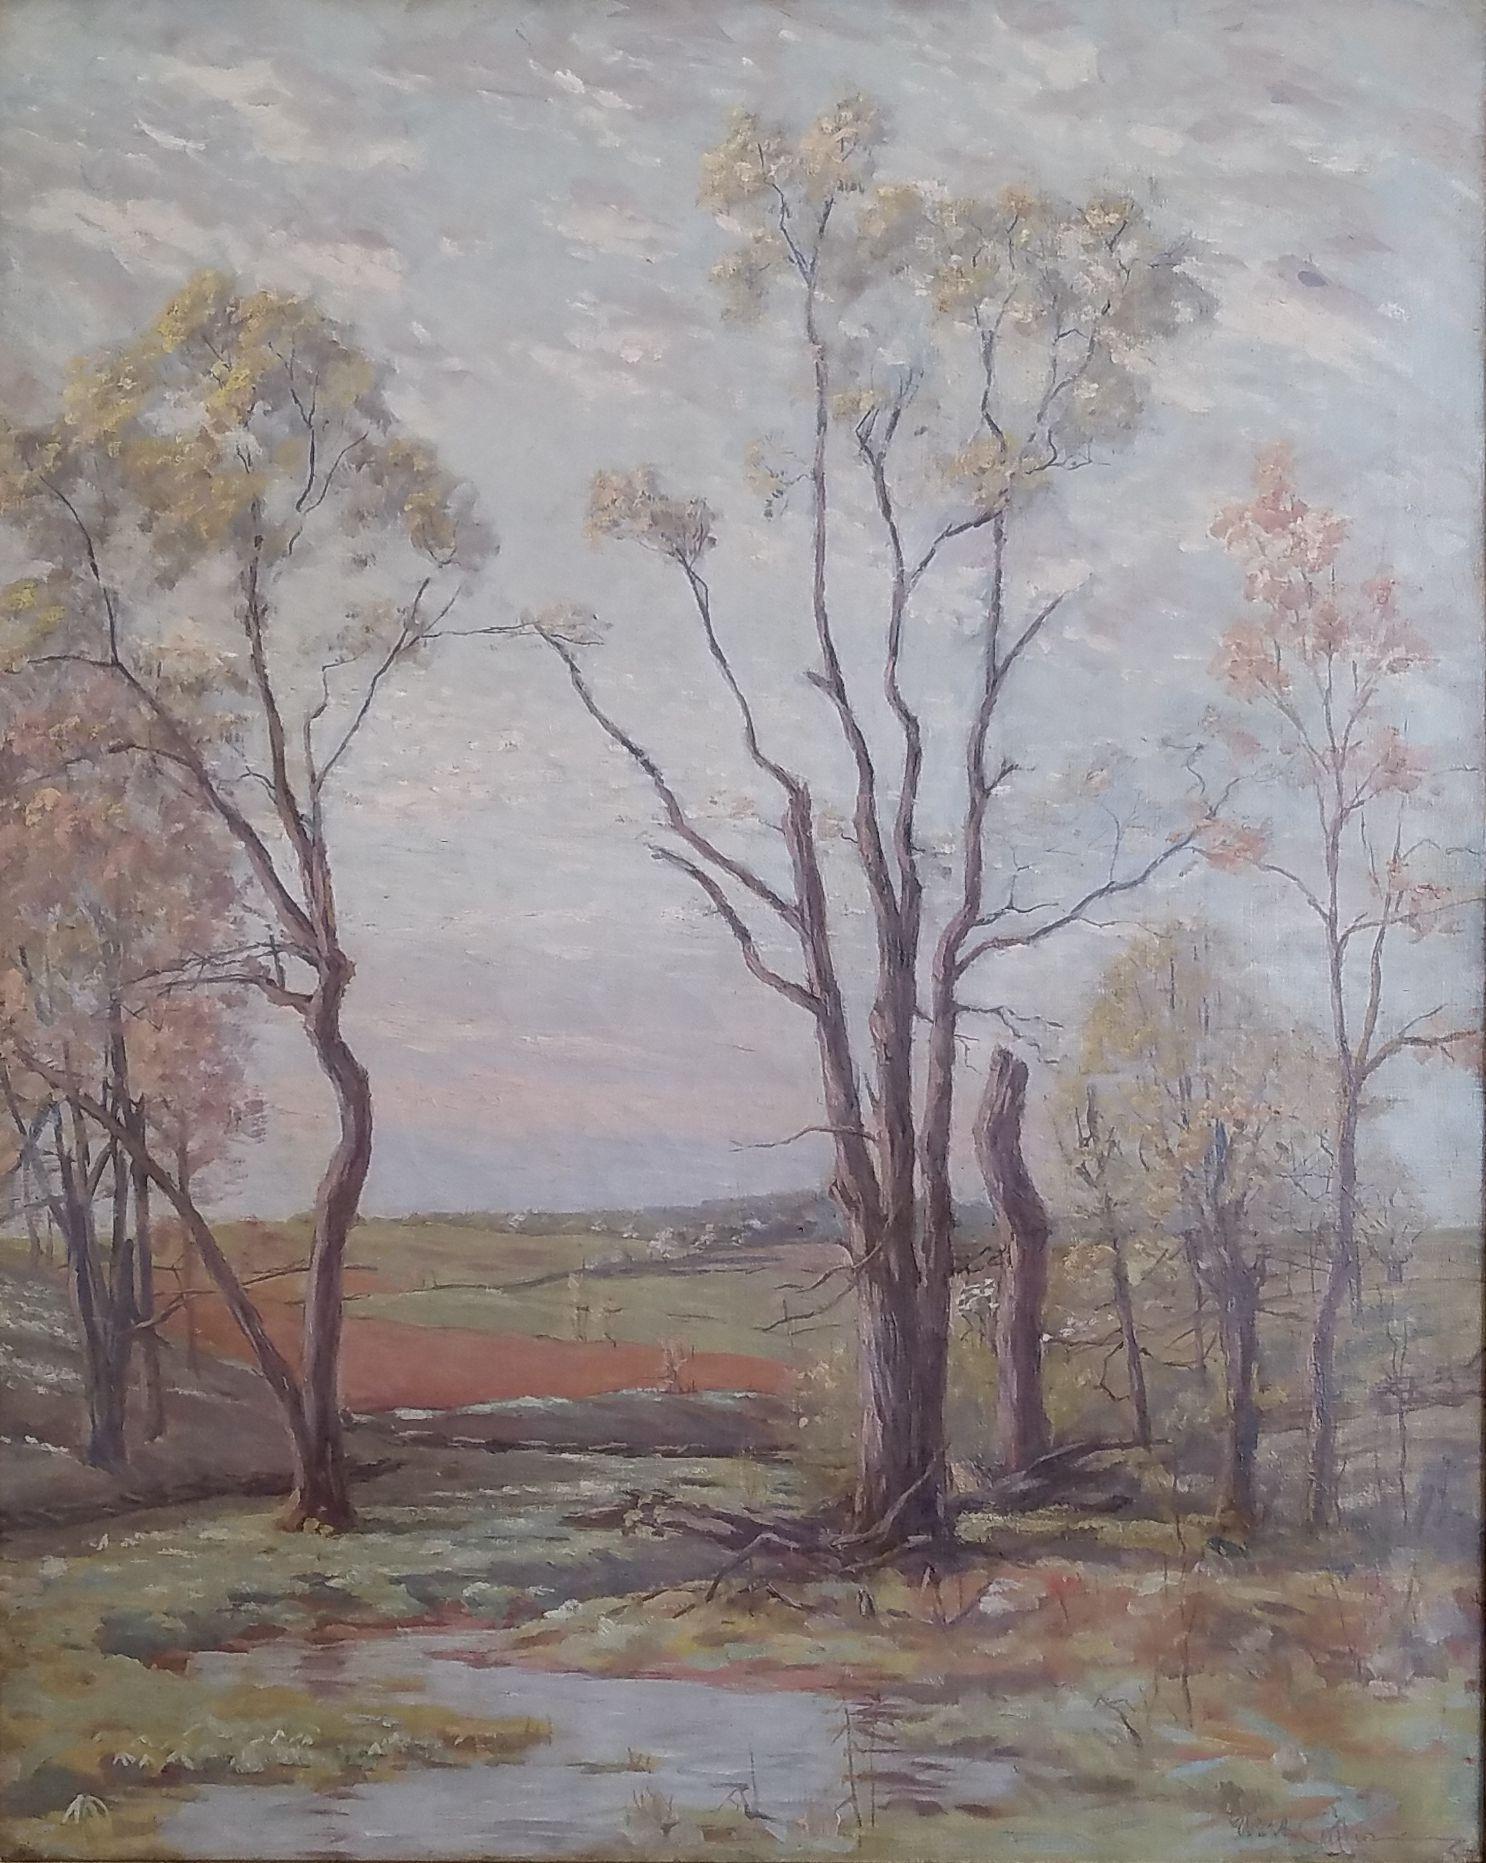 William Anderson Coffin (1855 - 1925)
Springtime Landscape, circa 1910
Oil on canvas
30 x 24 inches
Signed lower right


Landscape and figure painter William Anderson Coffin was born in Allegheny, Pennsylvania in 1855.  After study at Yale